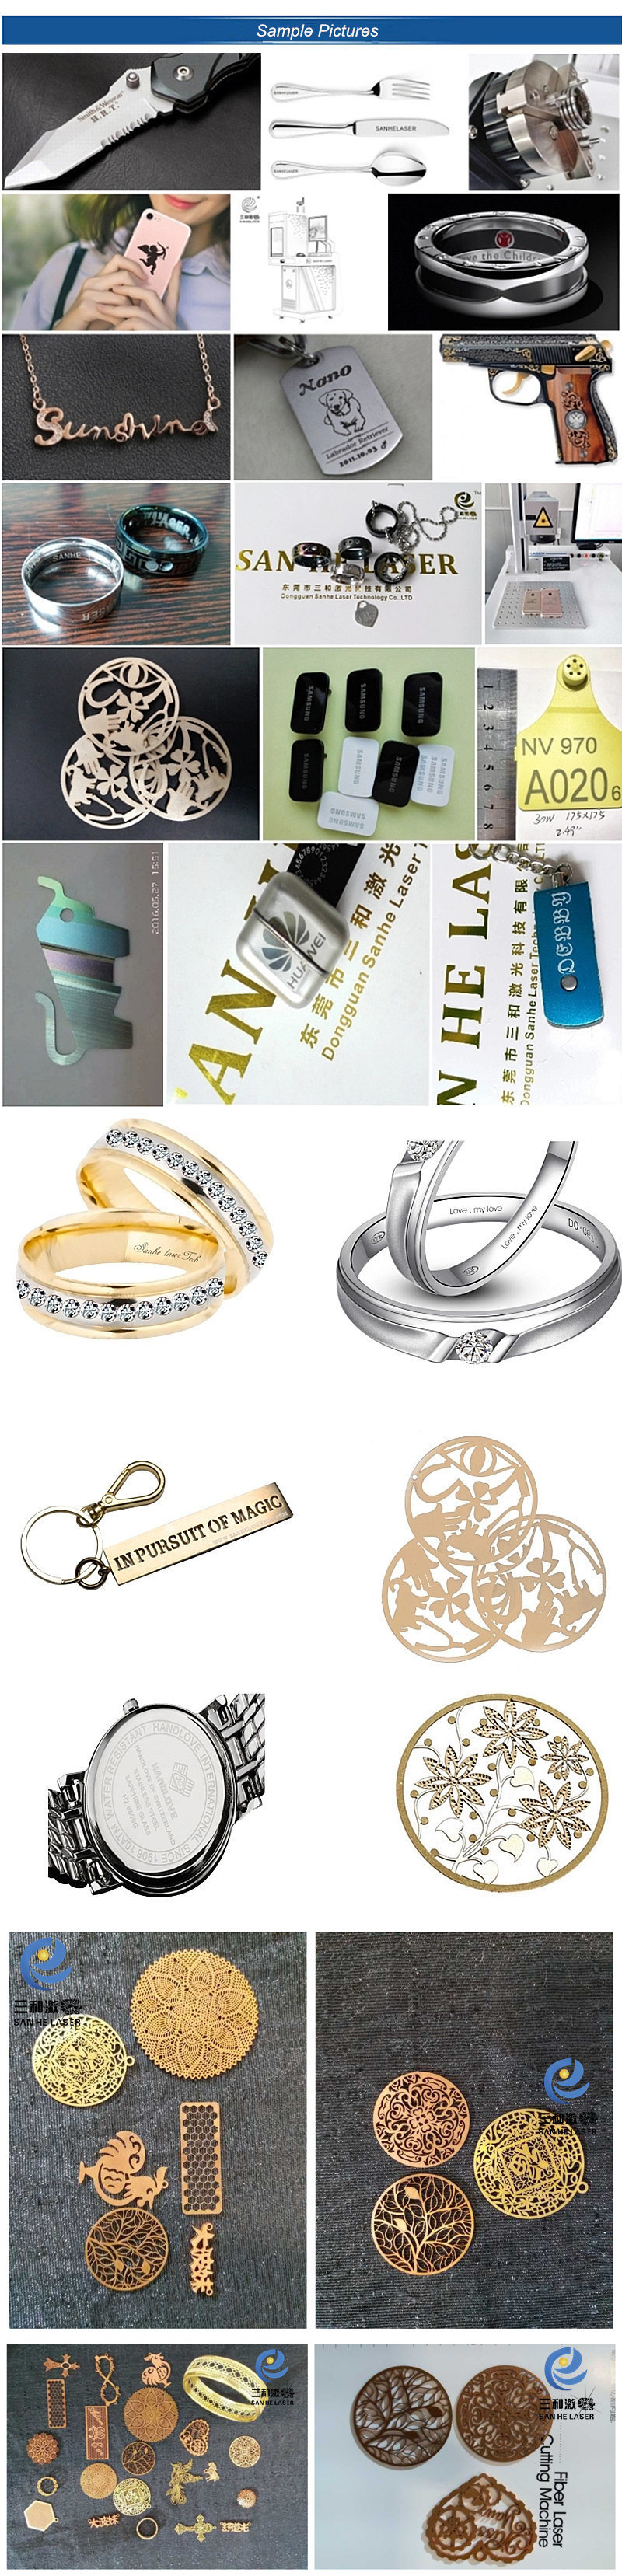 Gold Silver Jewelry Rings Necklace Bangles 50W60W Laser Engraving Marking Cutting Machine